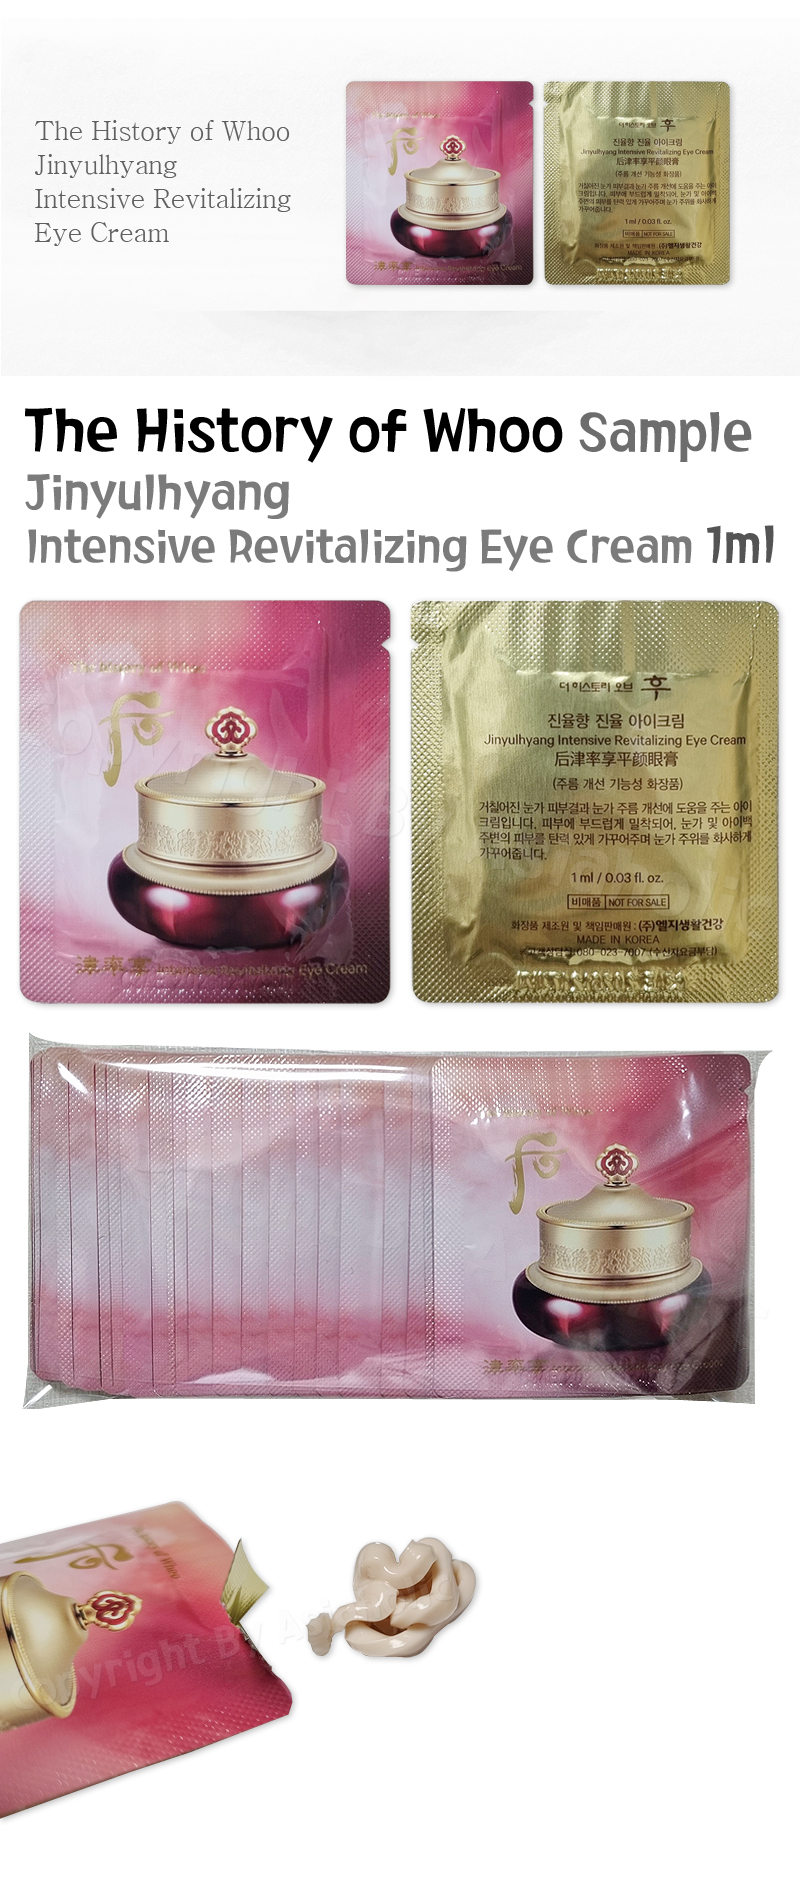 The history of WhooIntensive Revitalizing Eye Cream 1ml (10pcs ~ 150pcs) Sample Newest Version